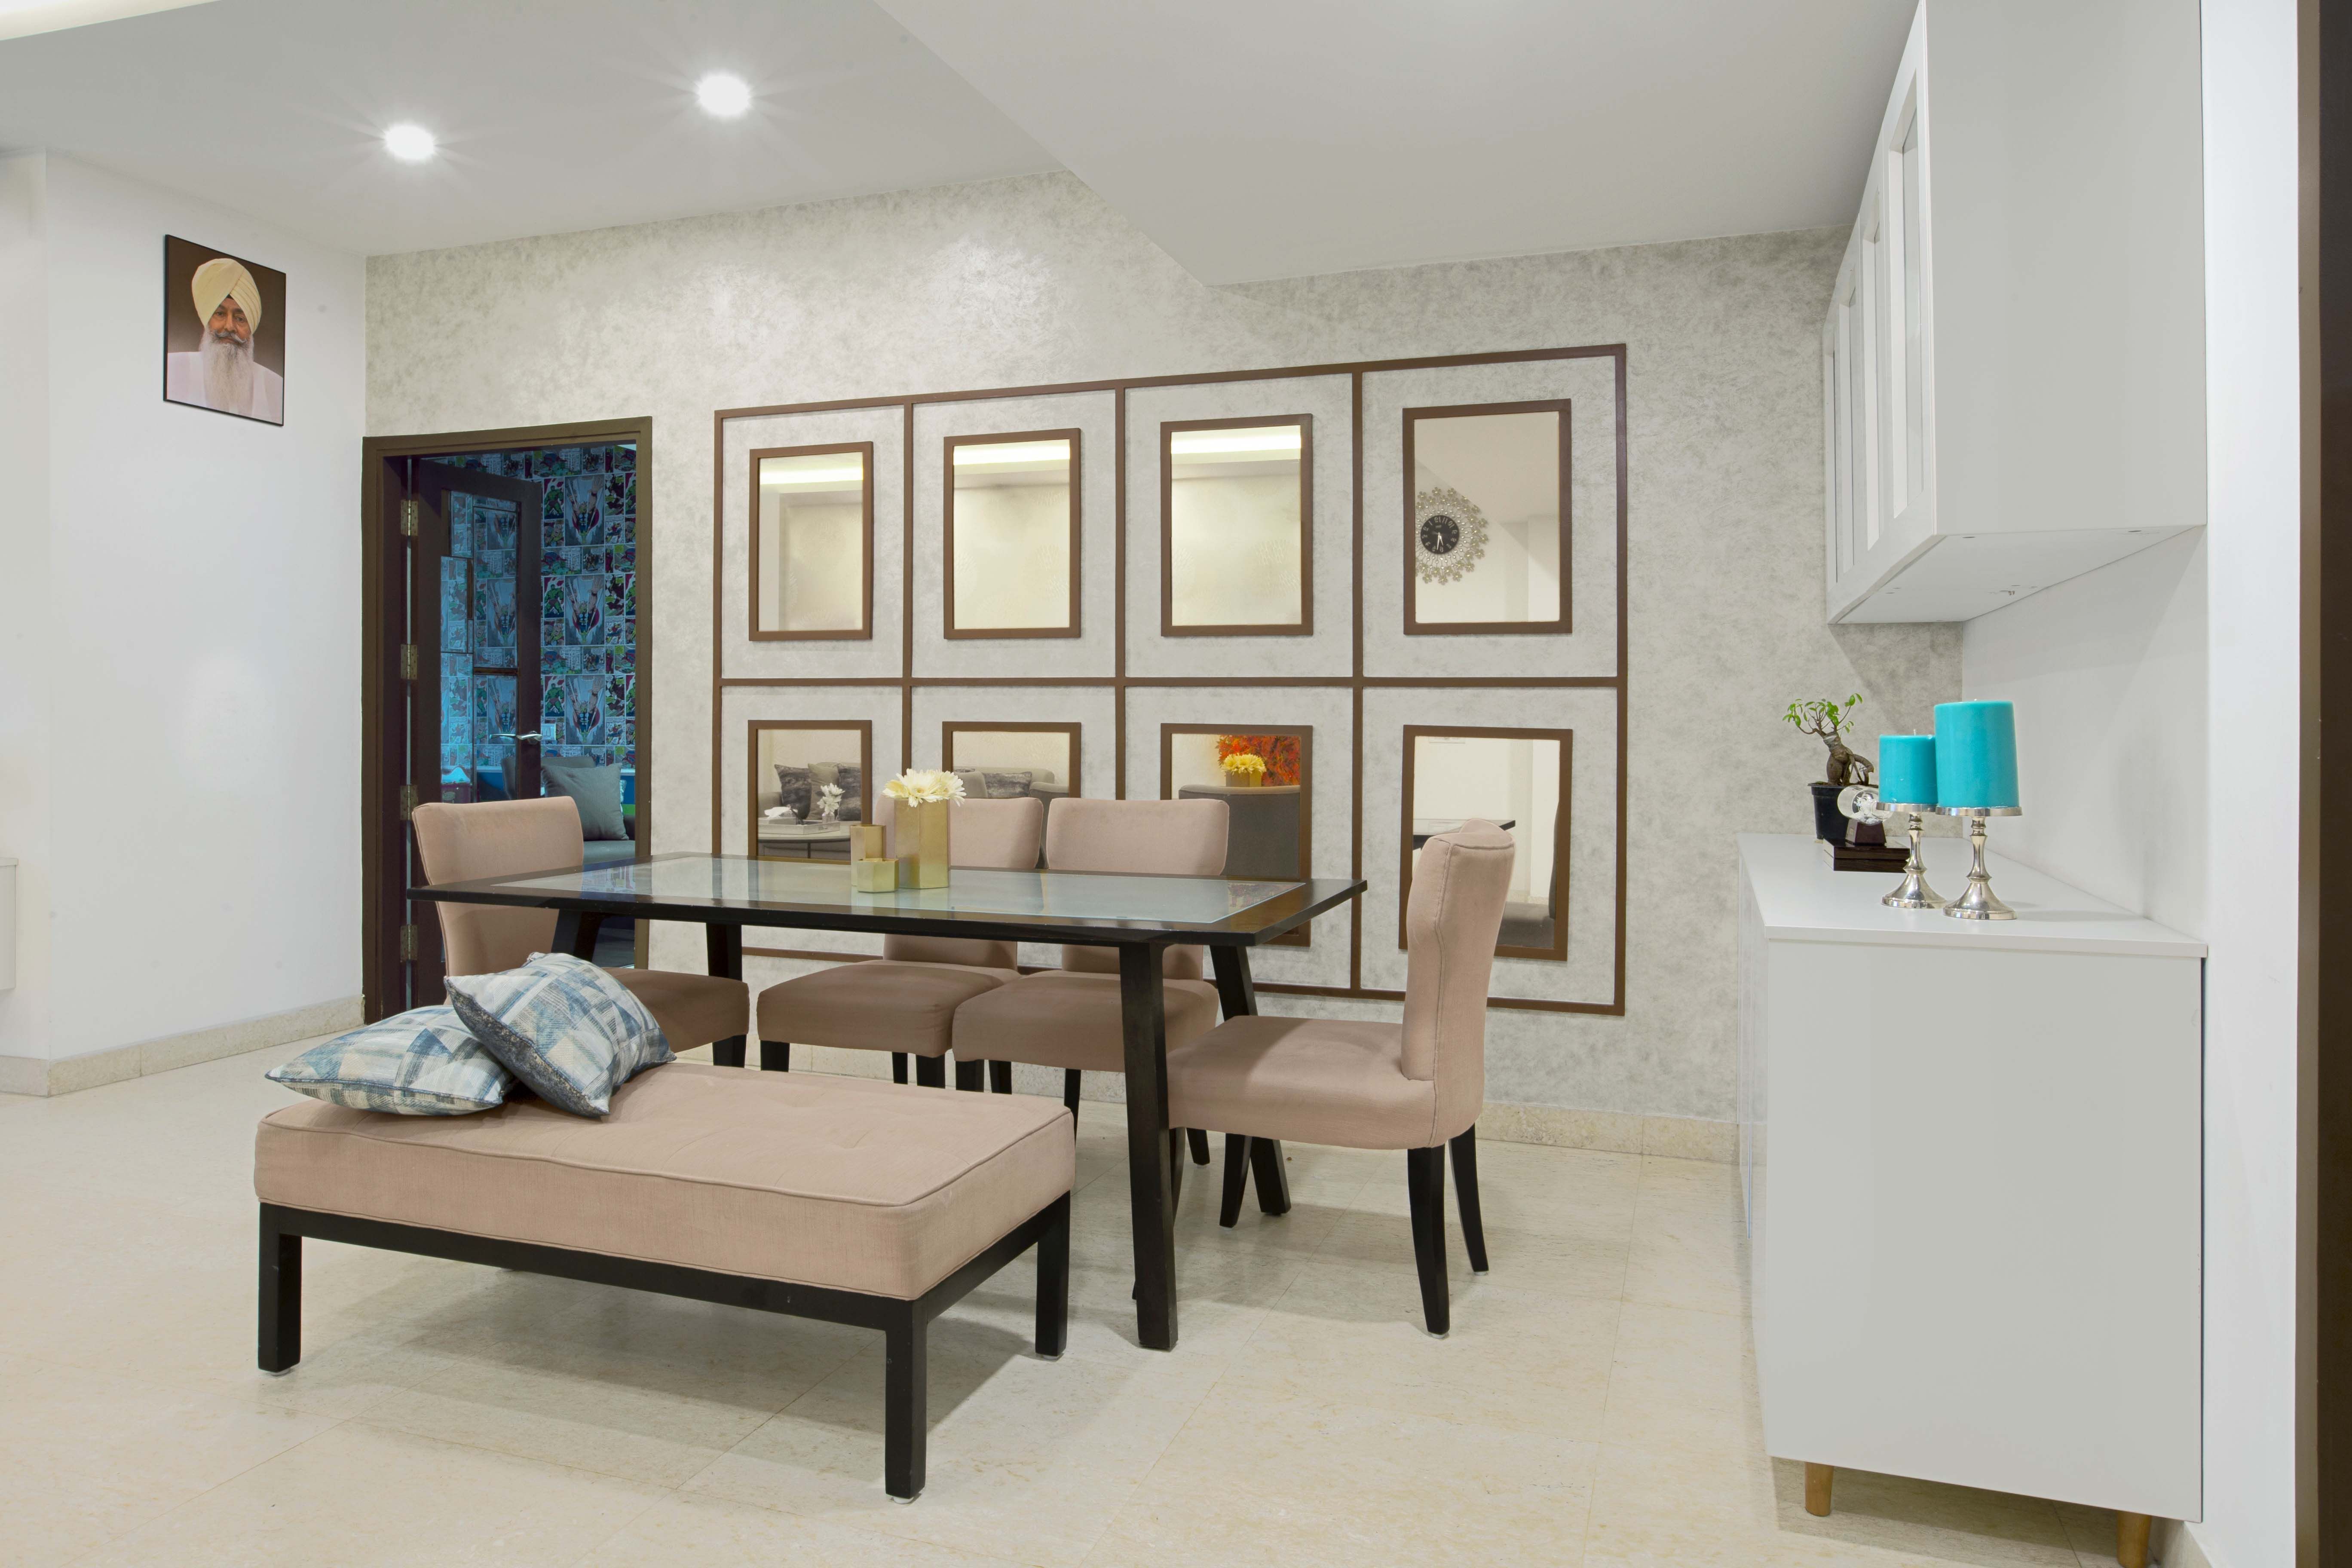 Contemporary Wooden 6-Seater Dining Room Design With Light Pink Upholstered Chairs And A Seater